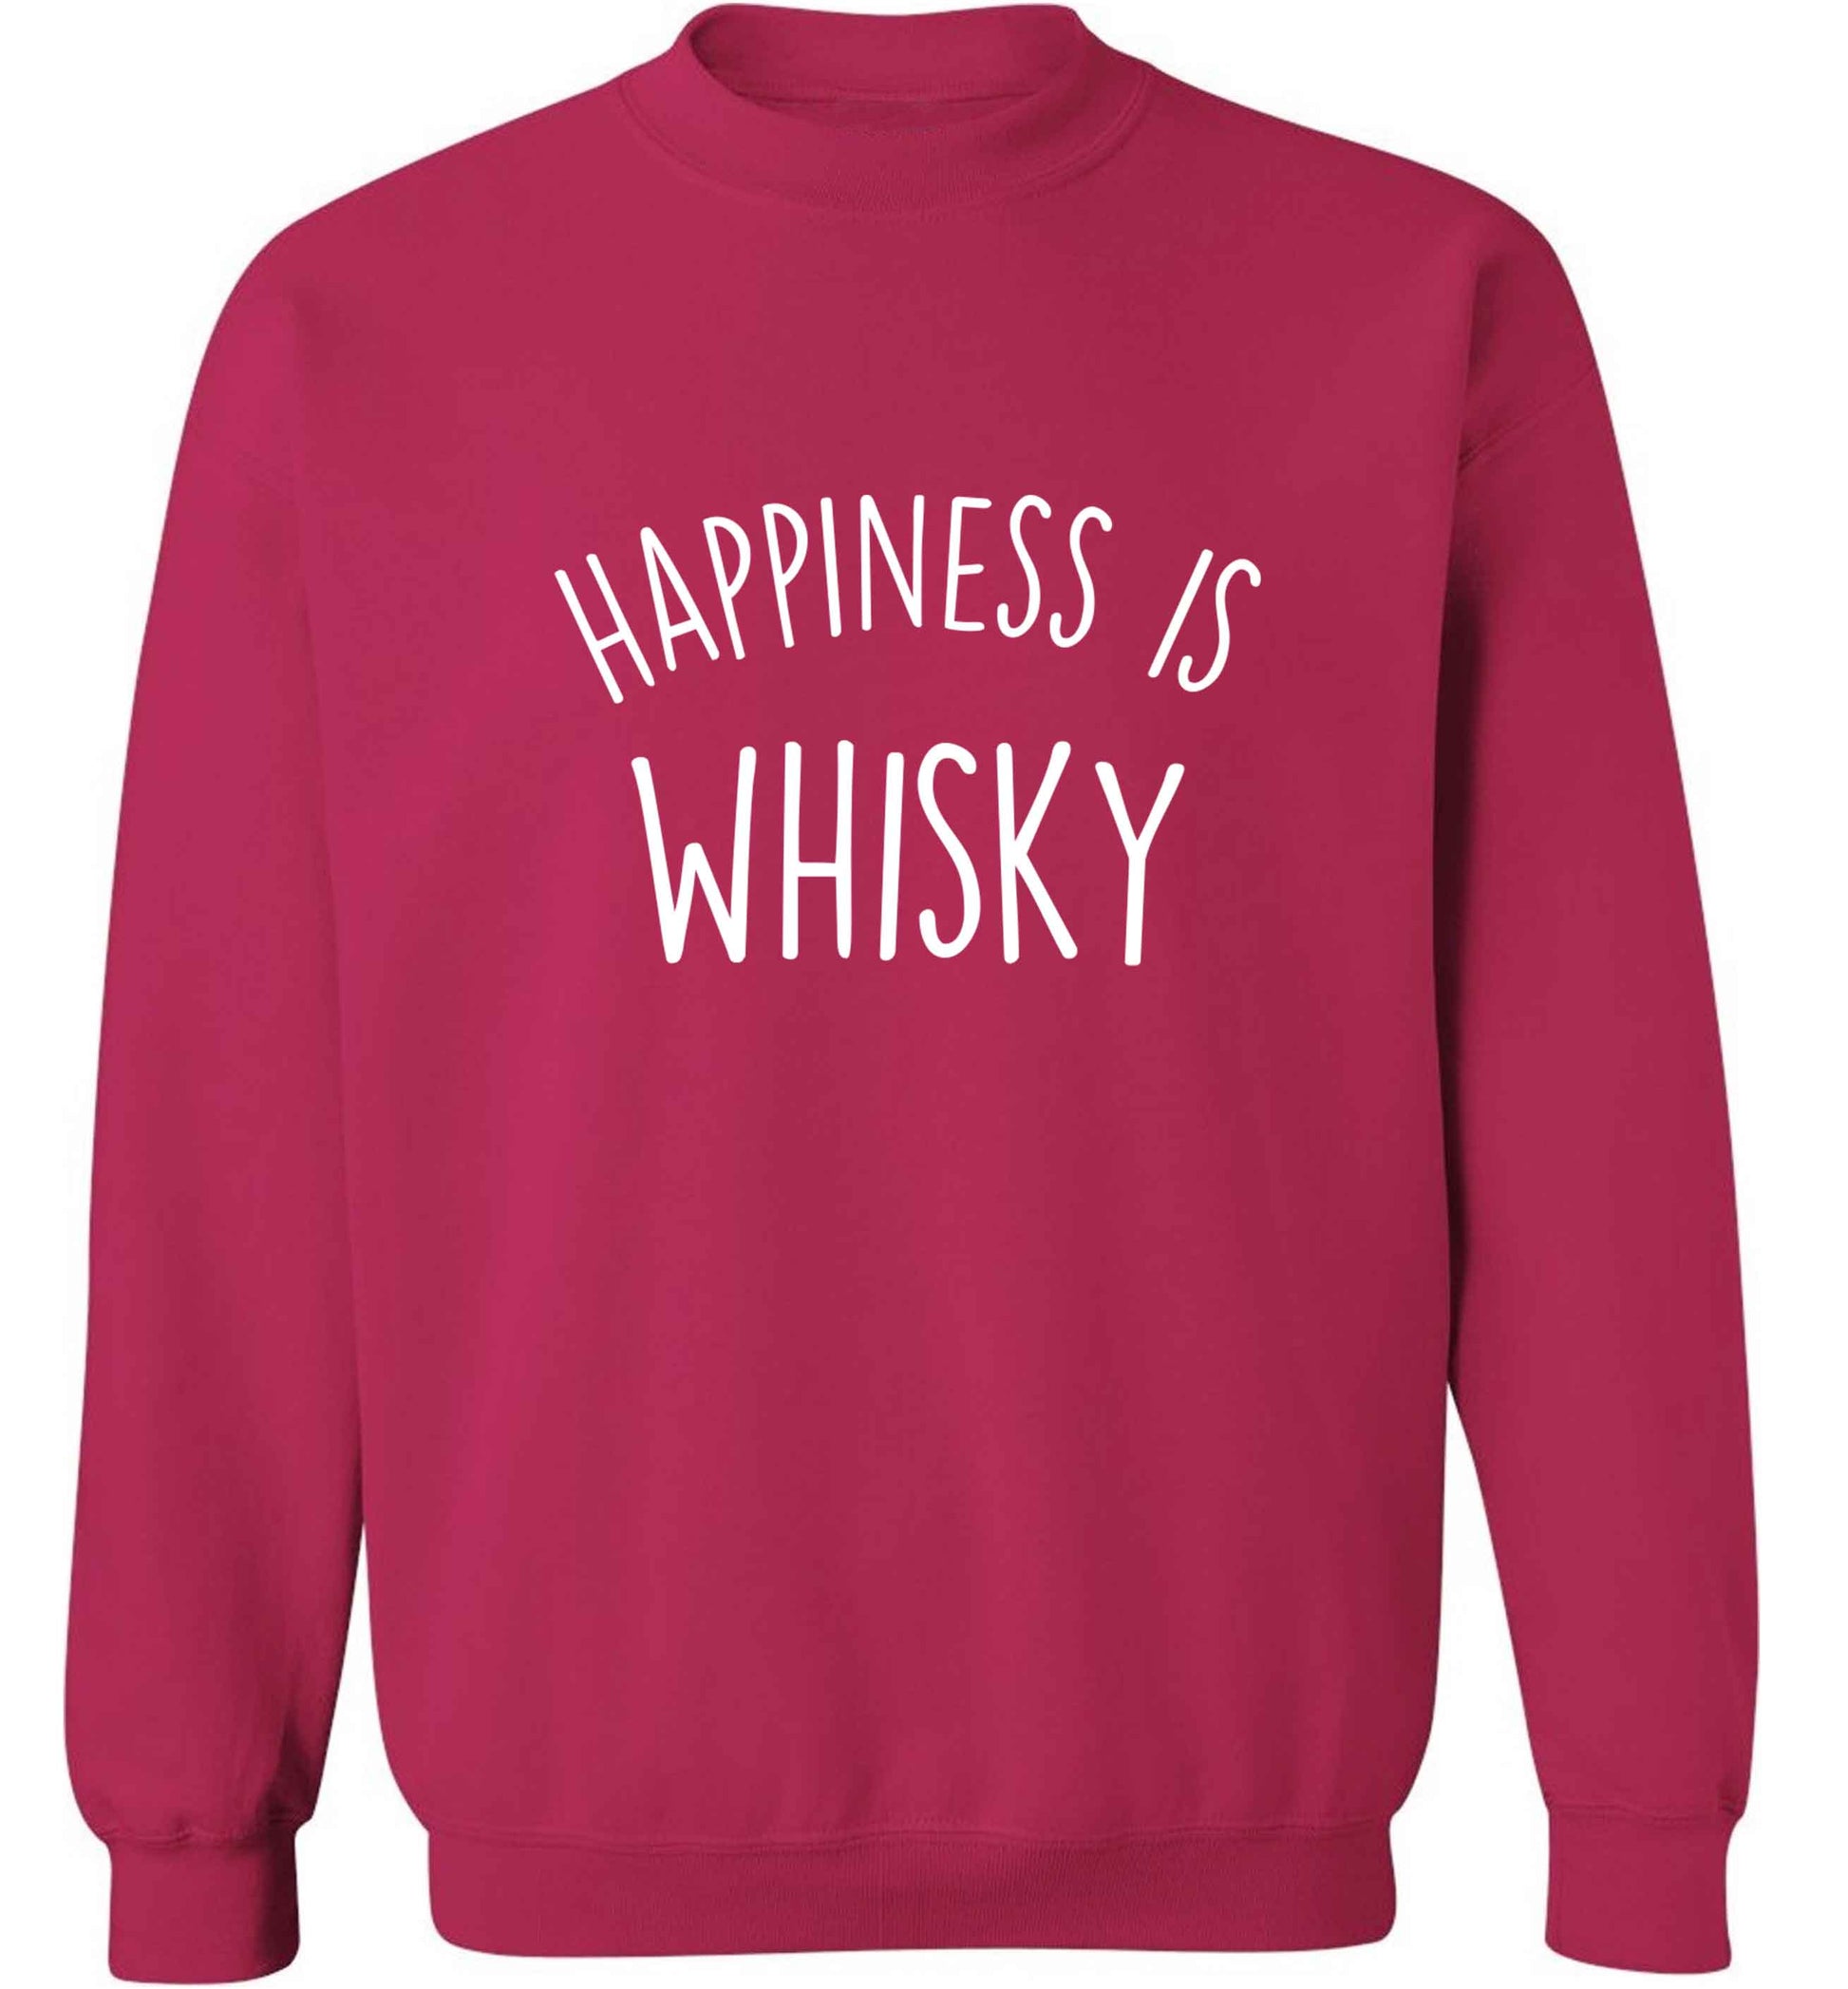 Happiness is whisky adult's unisex pink sweater 2XL